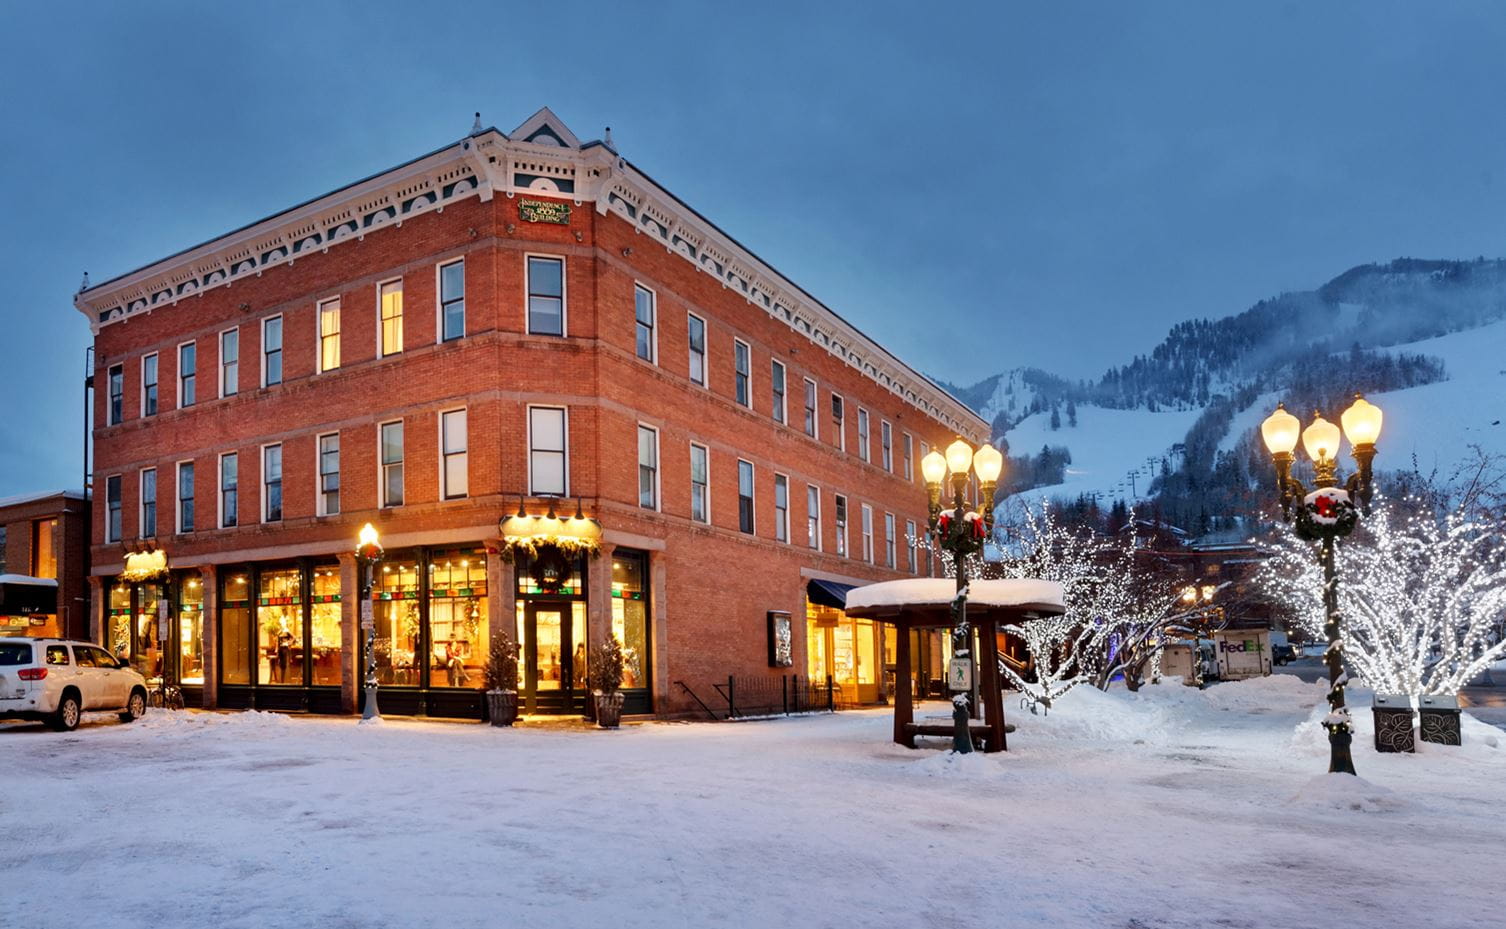 Independence Square Hotel in Aspen, CO by Frias Properties